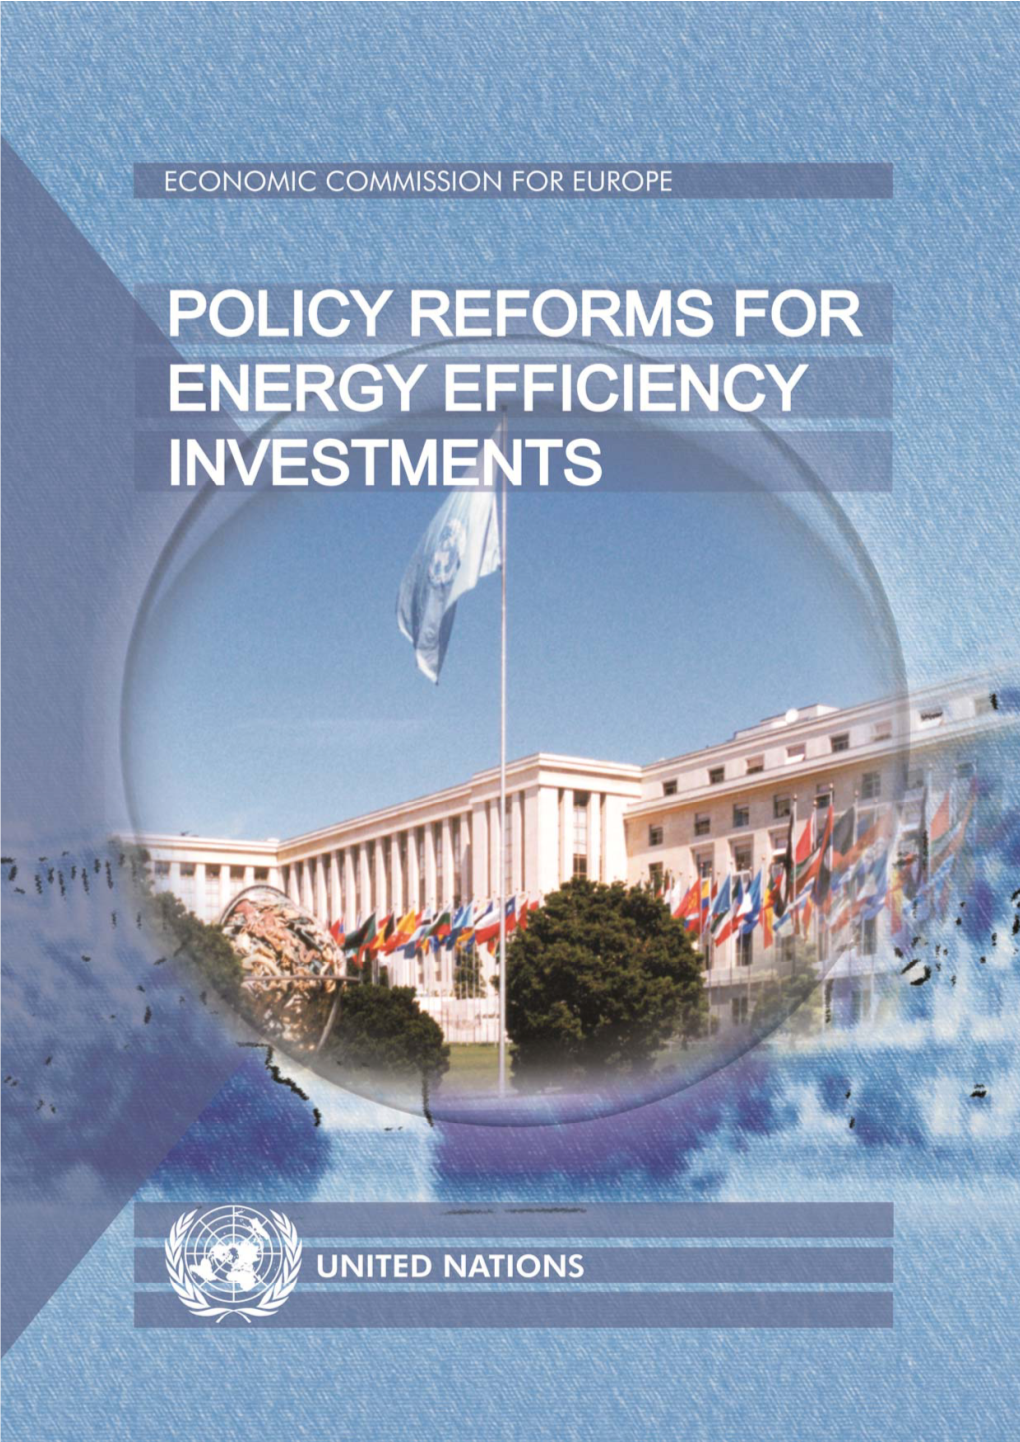 Regional Analysis of Policy Reforms to Promote Energy Efficiency and Renewable Energy Investments